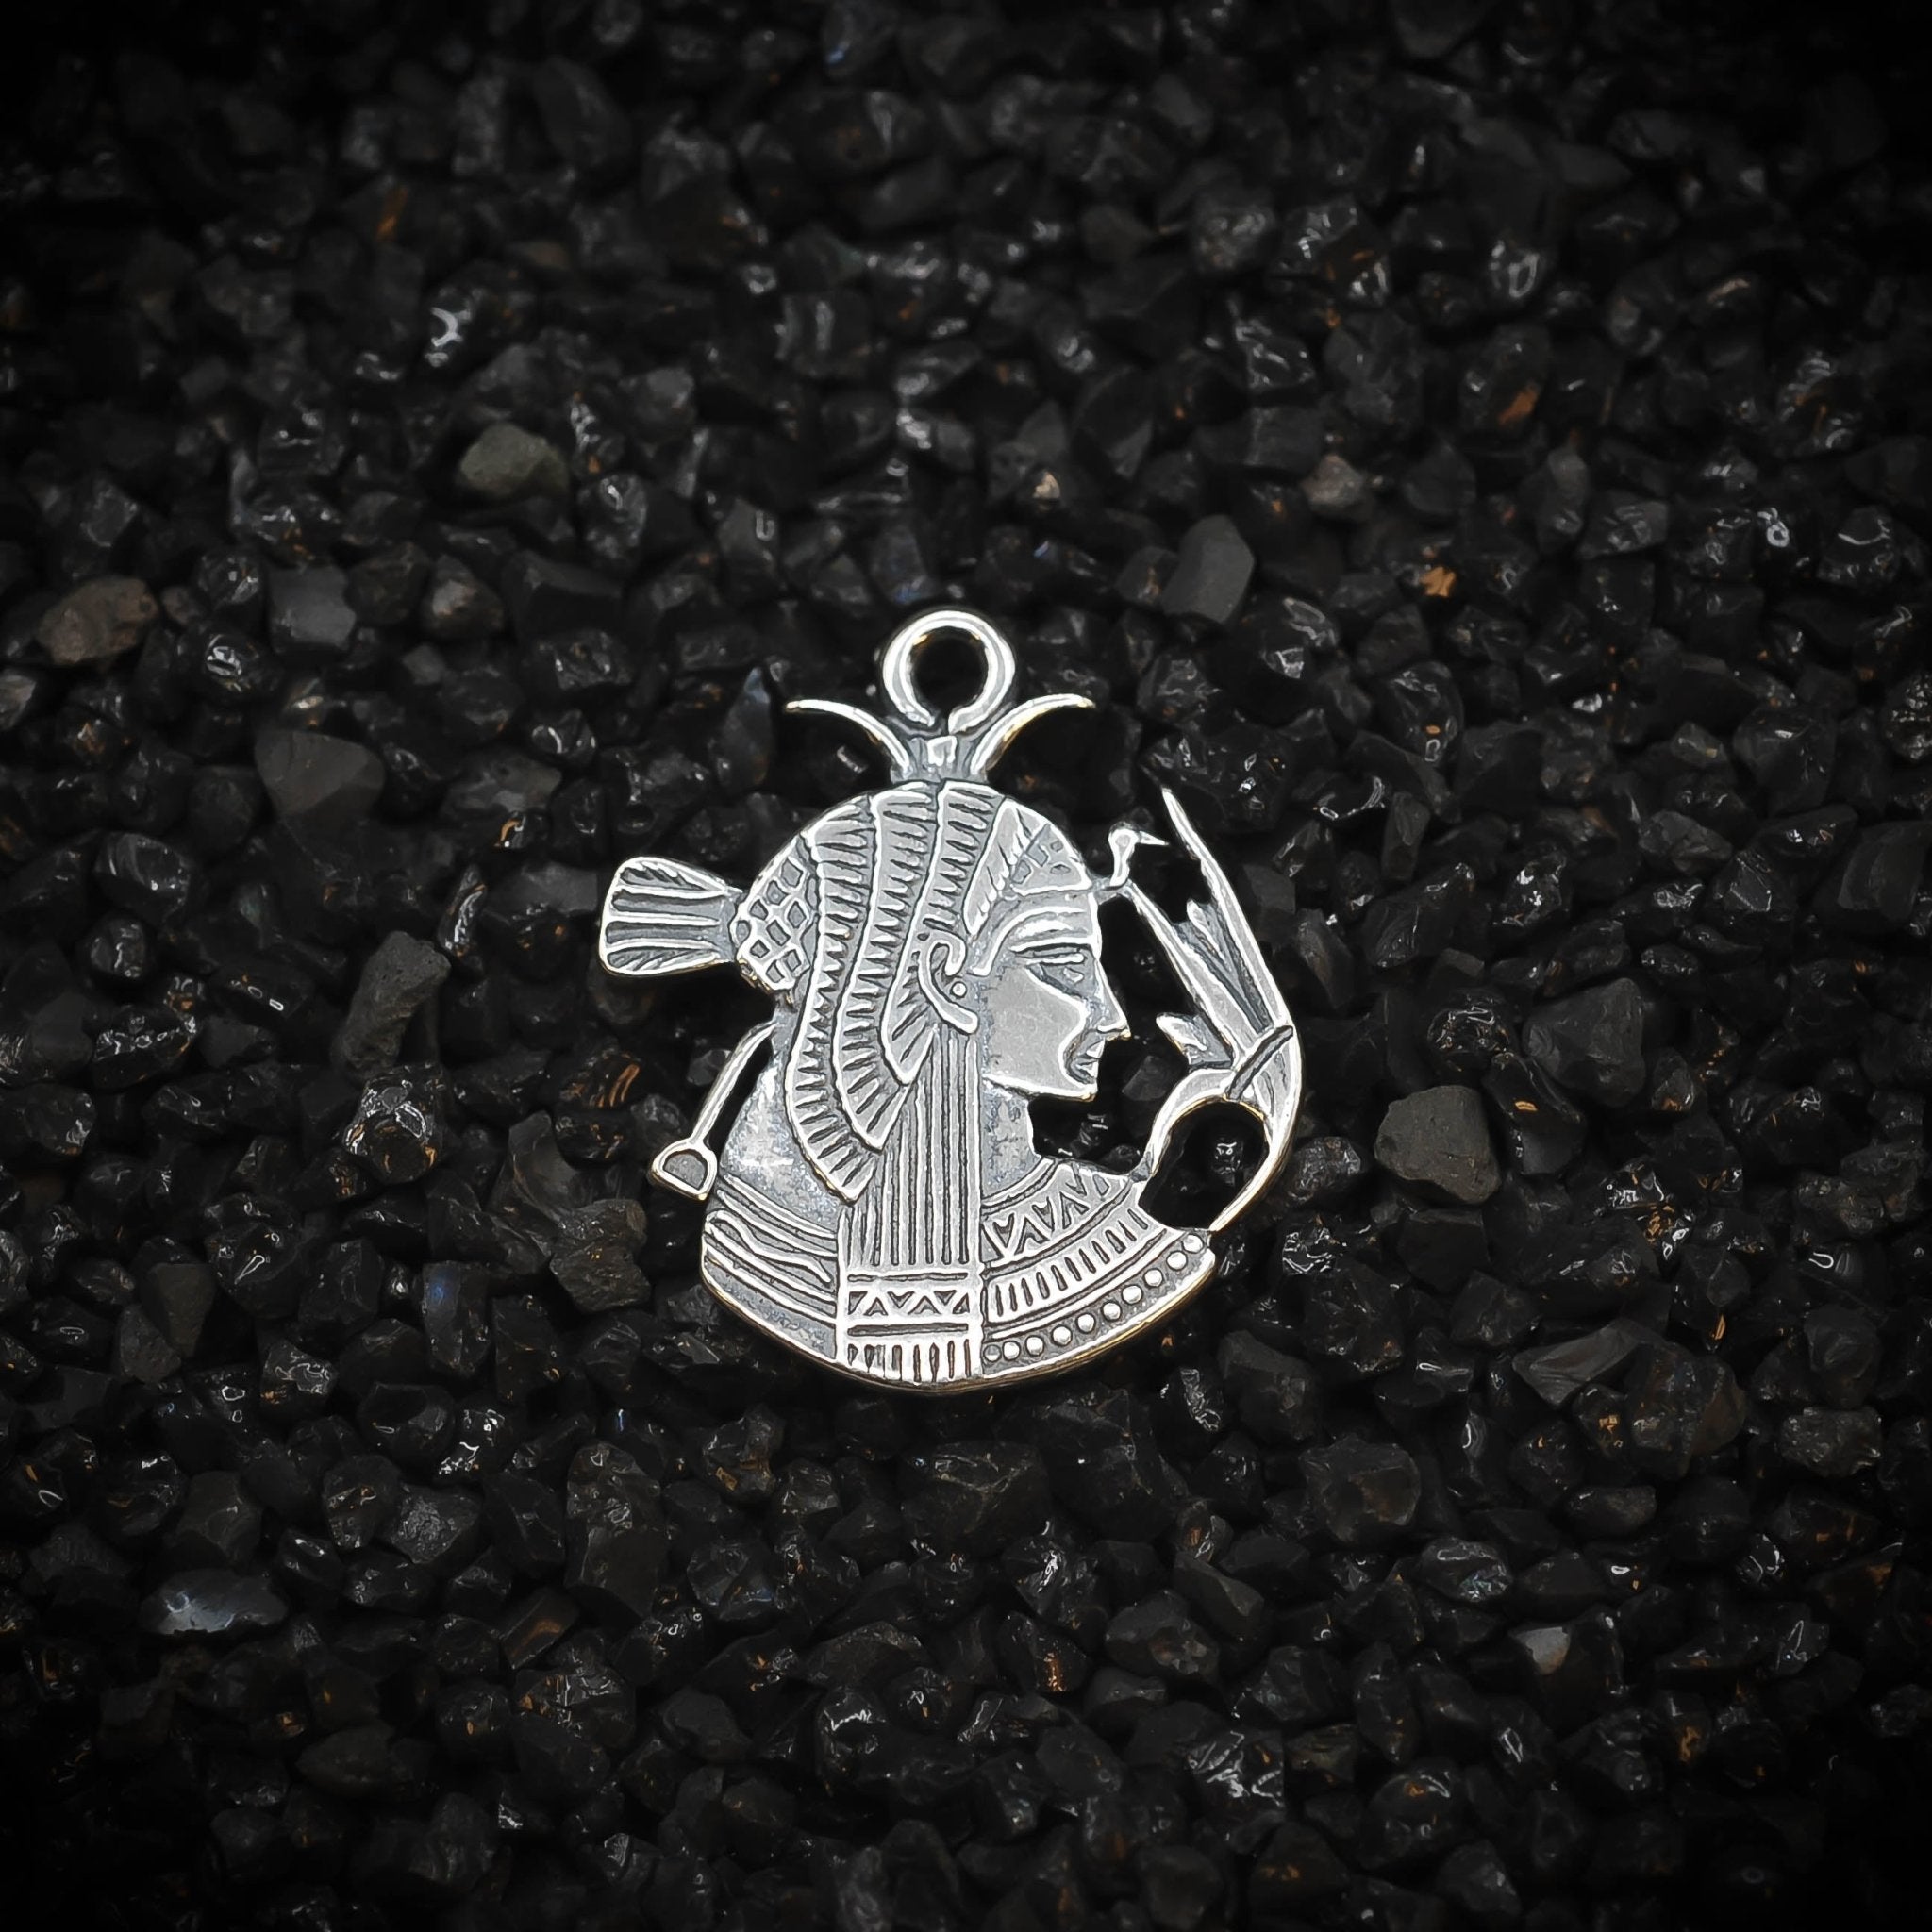 Cleopatra Queen of Ancient Egypt Side Profile Charm | 925 Sterling Silver, Oxidized | Jewelry Making Pendant - HarperCrown